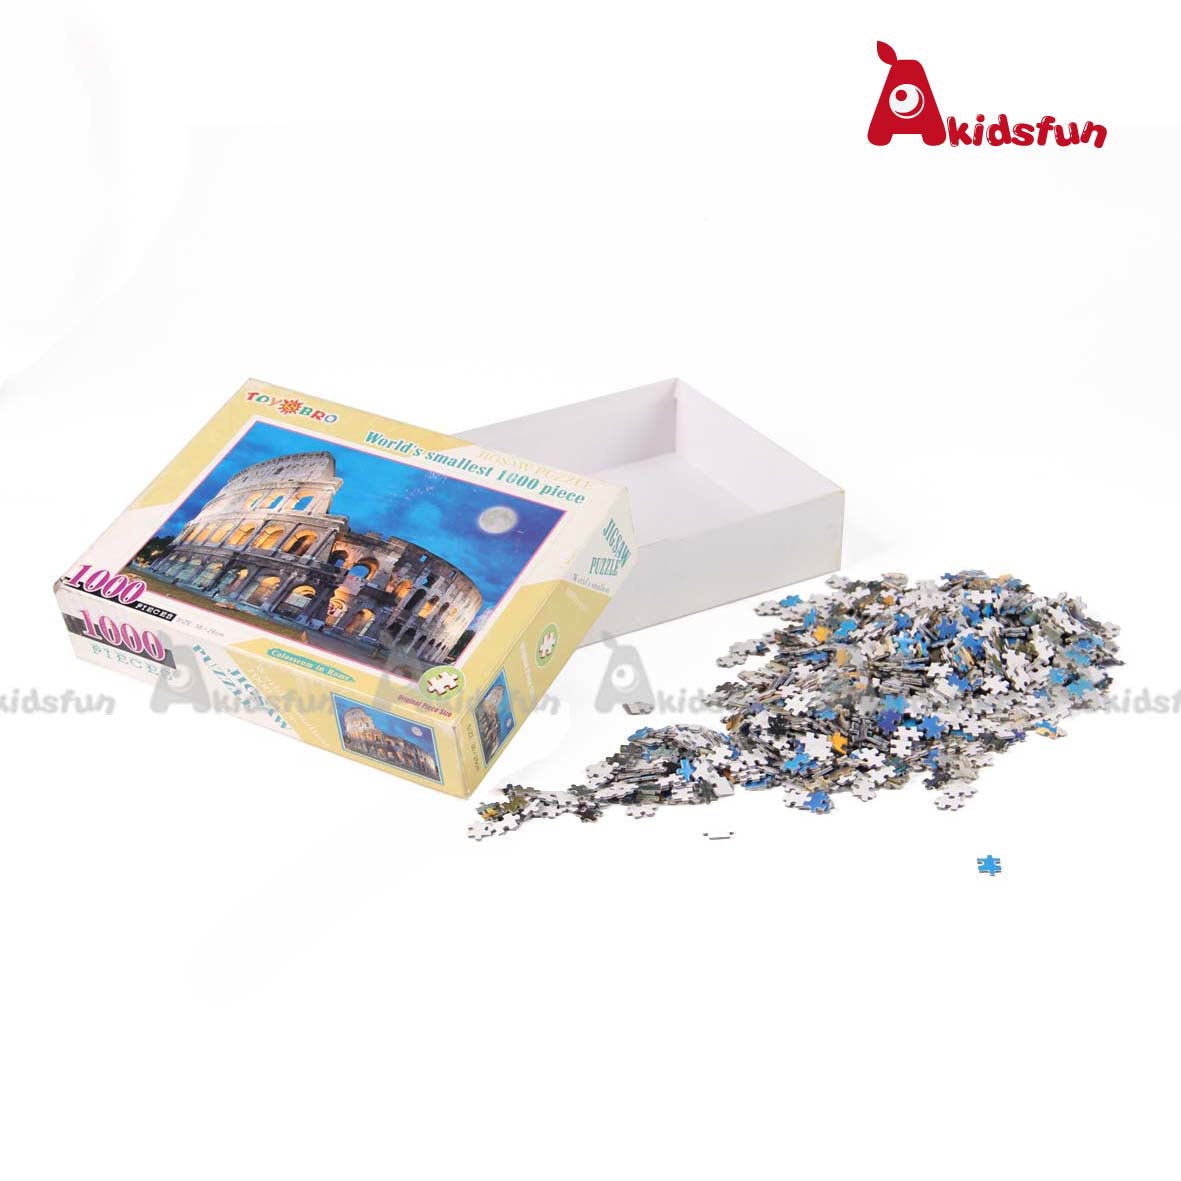 Jigsaw Puzzle Packed in Gift Box (bottom and lid box)